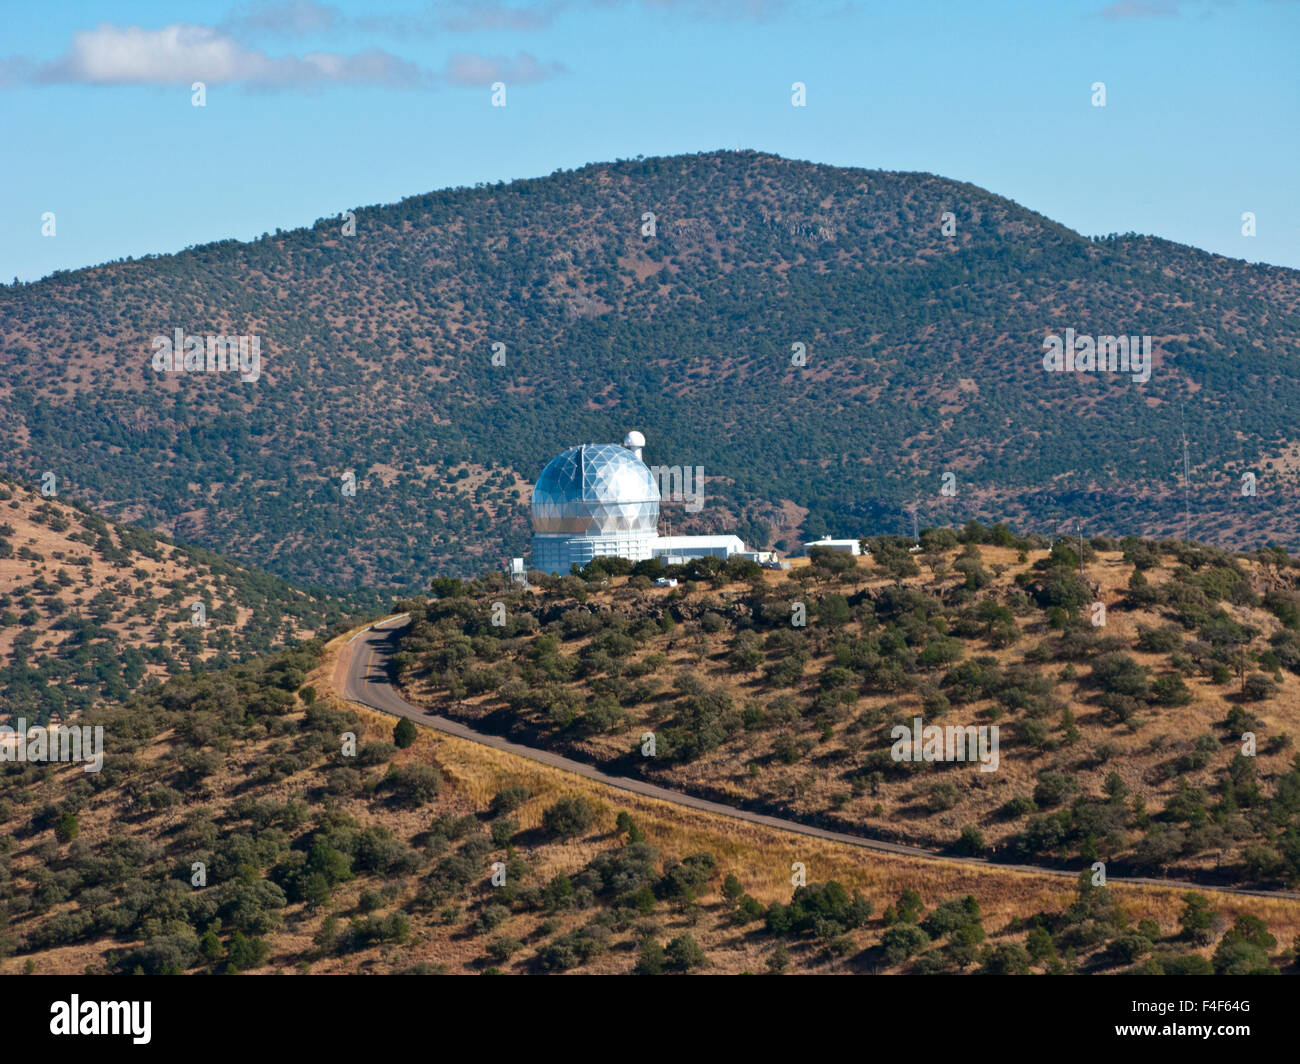 USA, Fort Davis, Texas, McDonald Observatory, Mount Fowlkes, Hobby-Eberly Telescope, Fifth Largest in World Exterior view of Observatory. Stock Photo